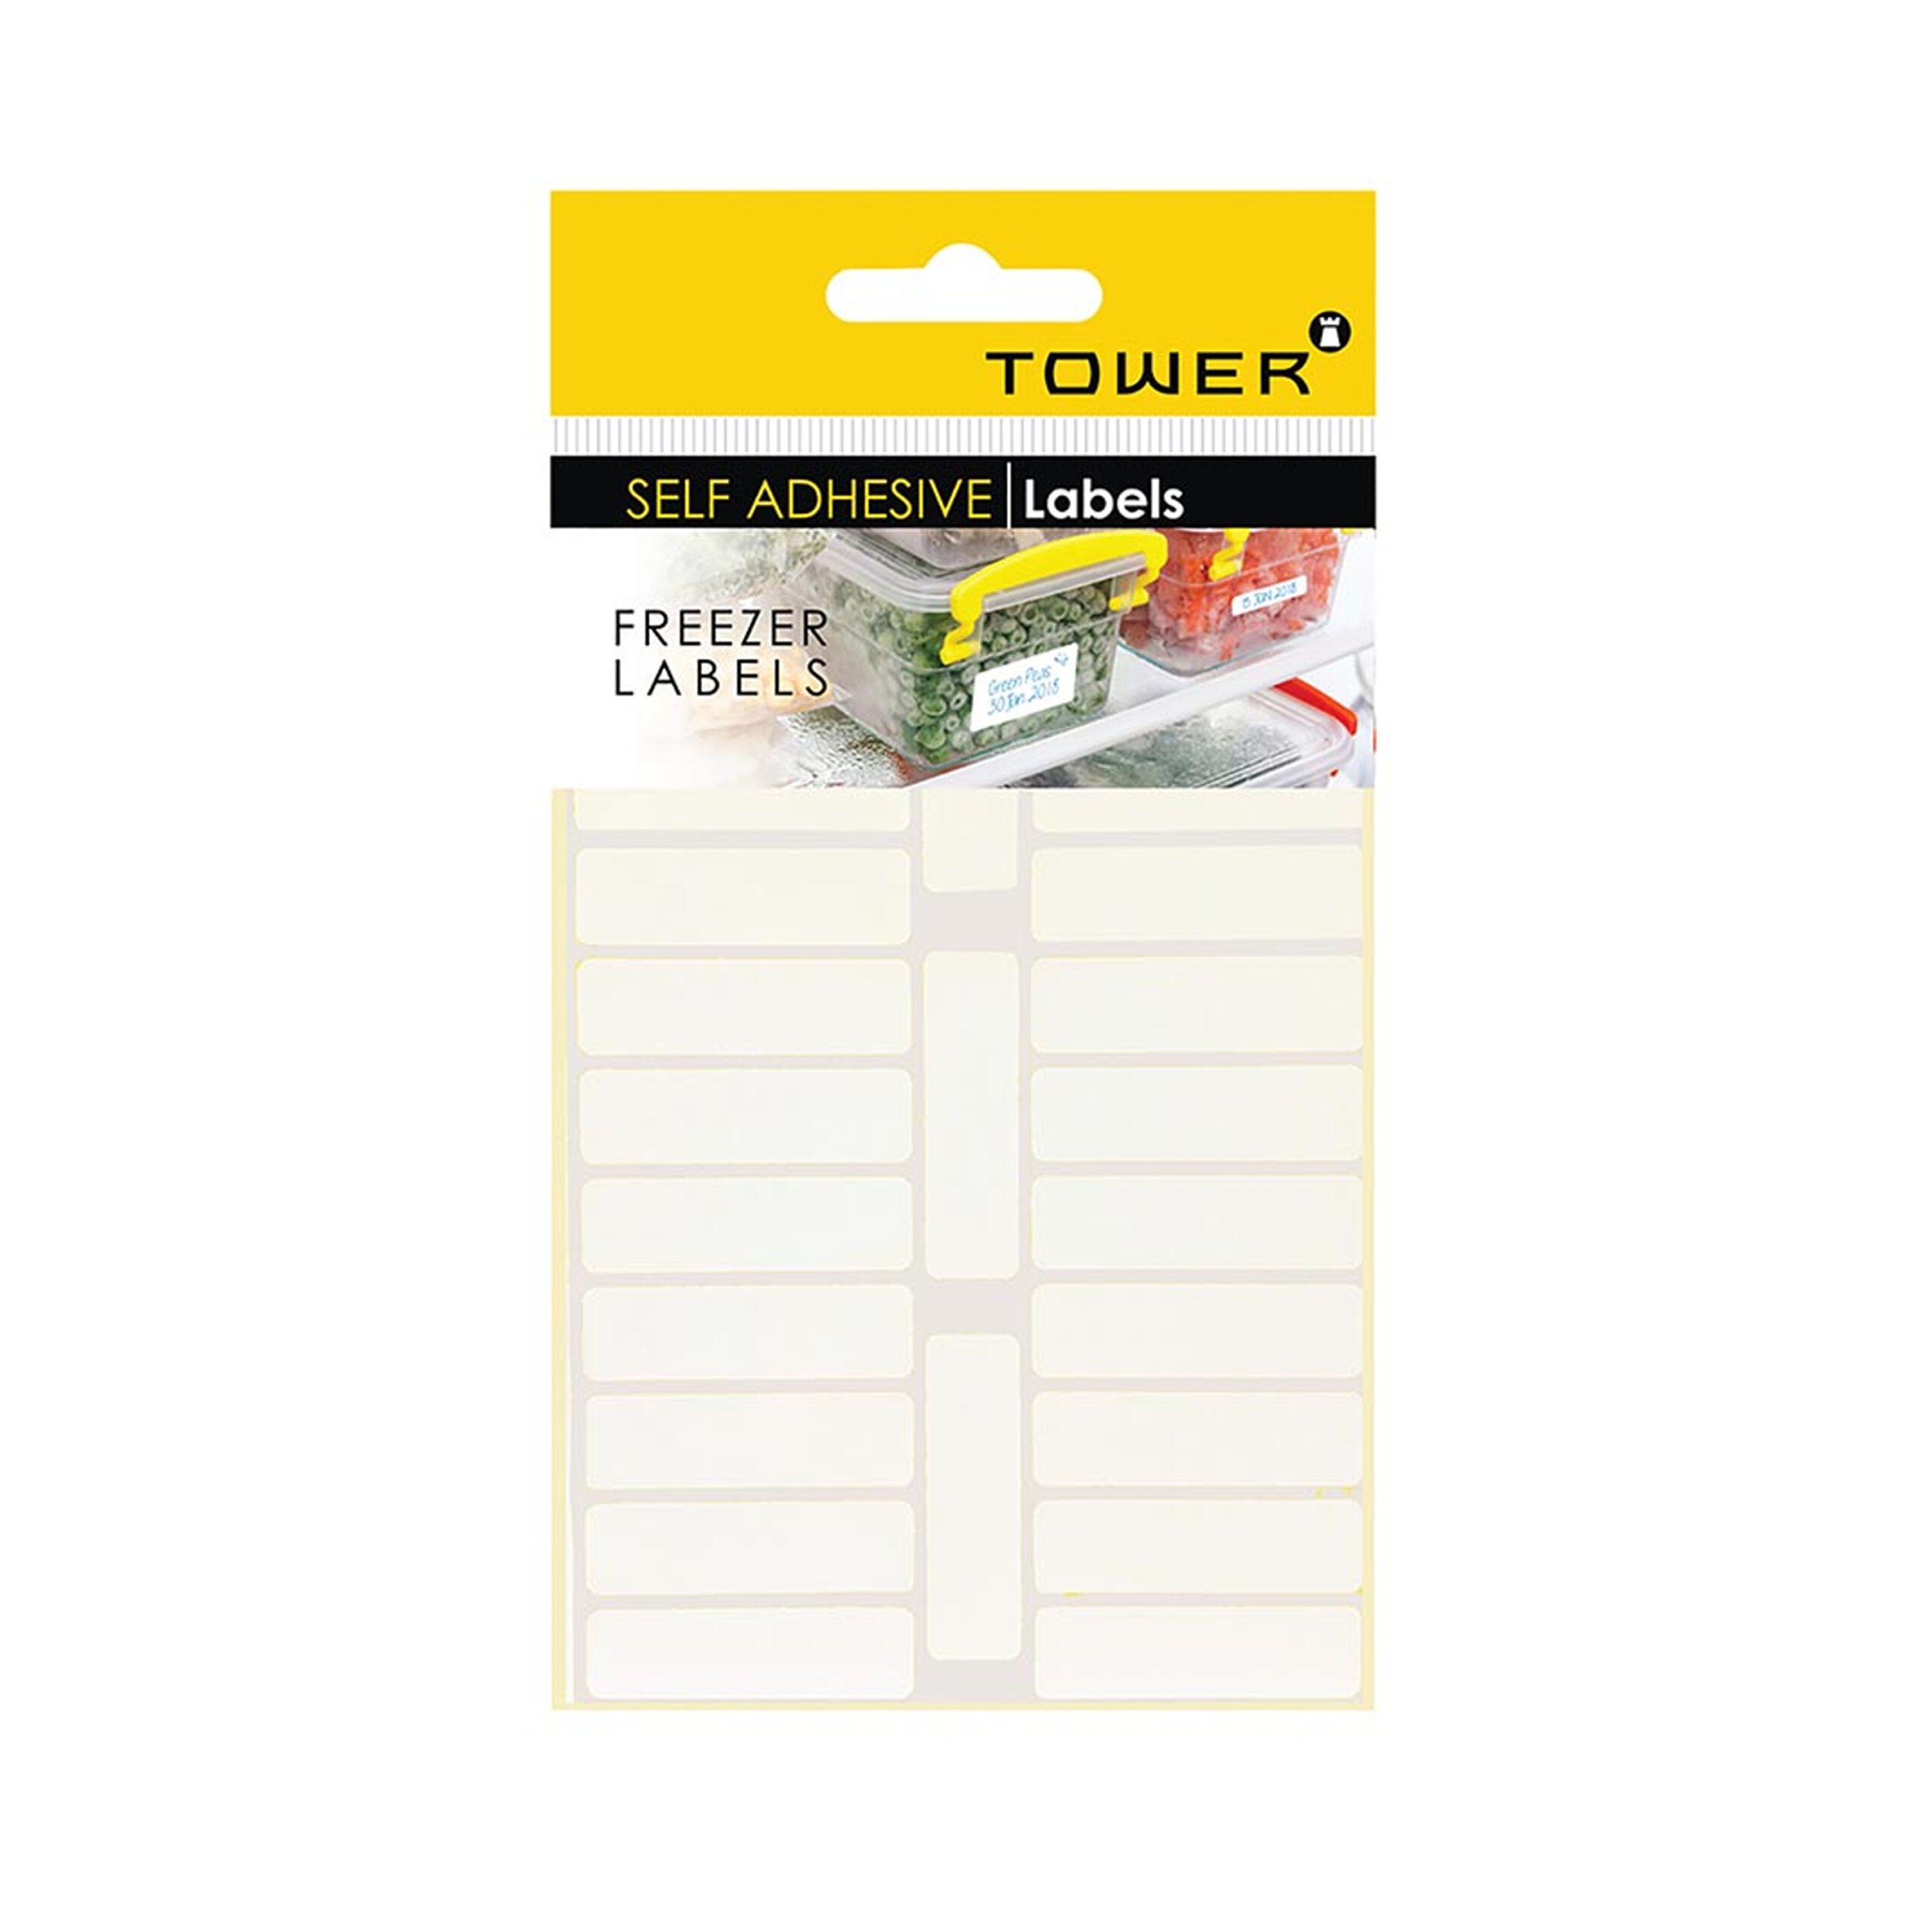 TOWER  SELF
ADHESIVE
FREEZER LABELS
45x13mm  (250
LABELS)